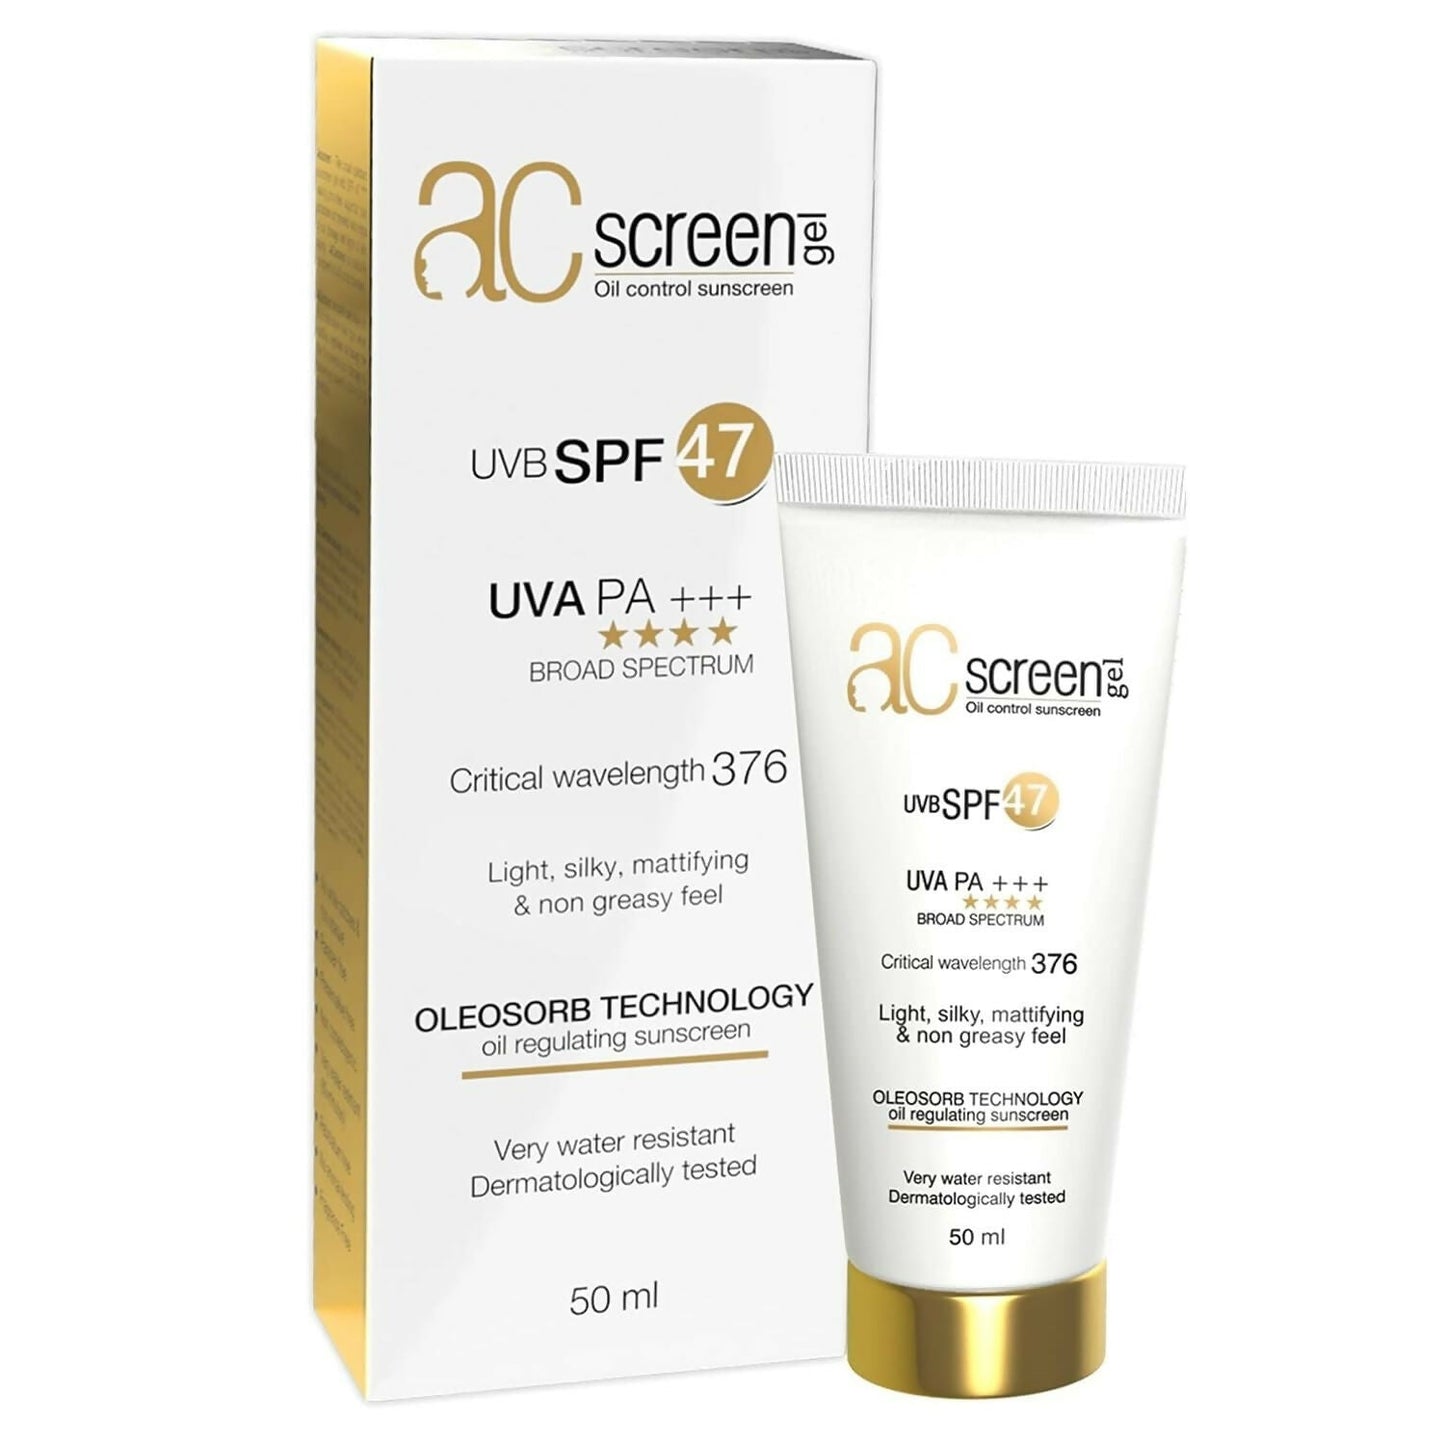 Acscreen Sunscreen For Oily And Acne Skin - (UVB SPF 47) UVA PA +++